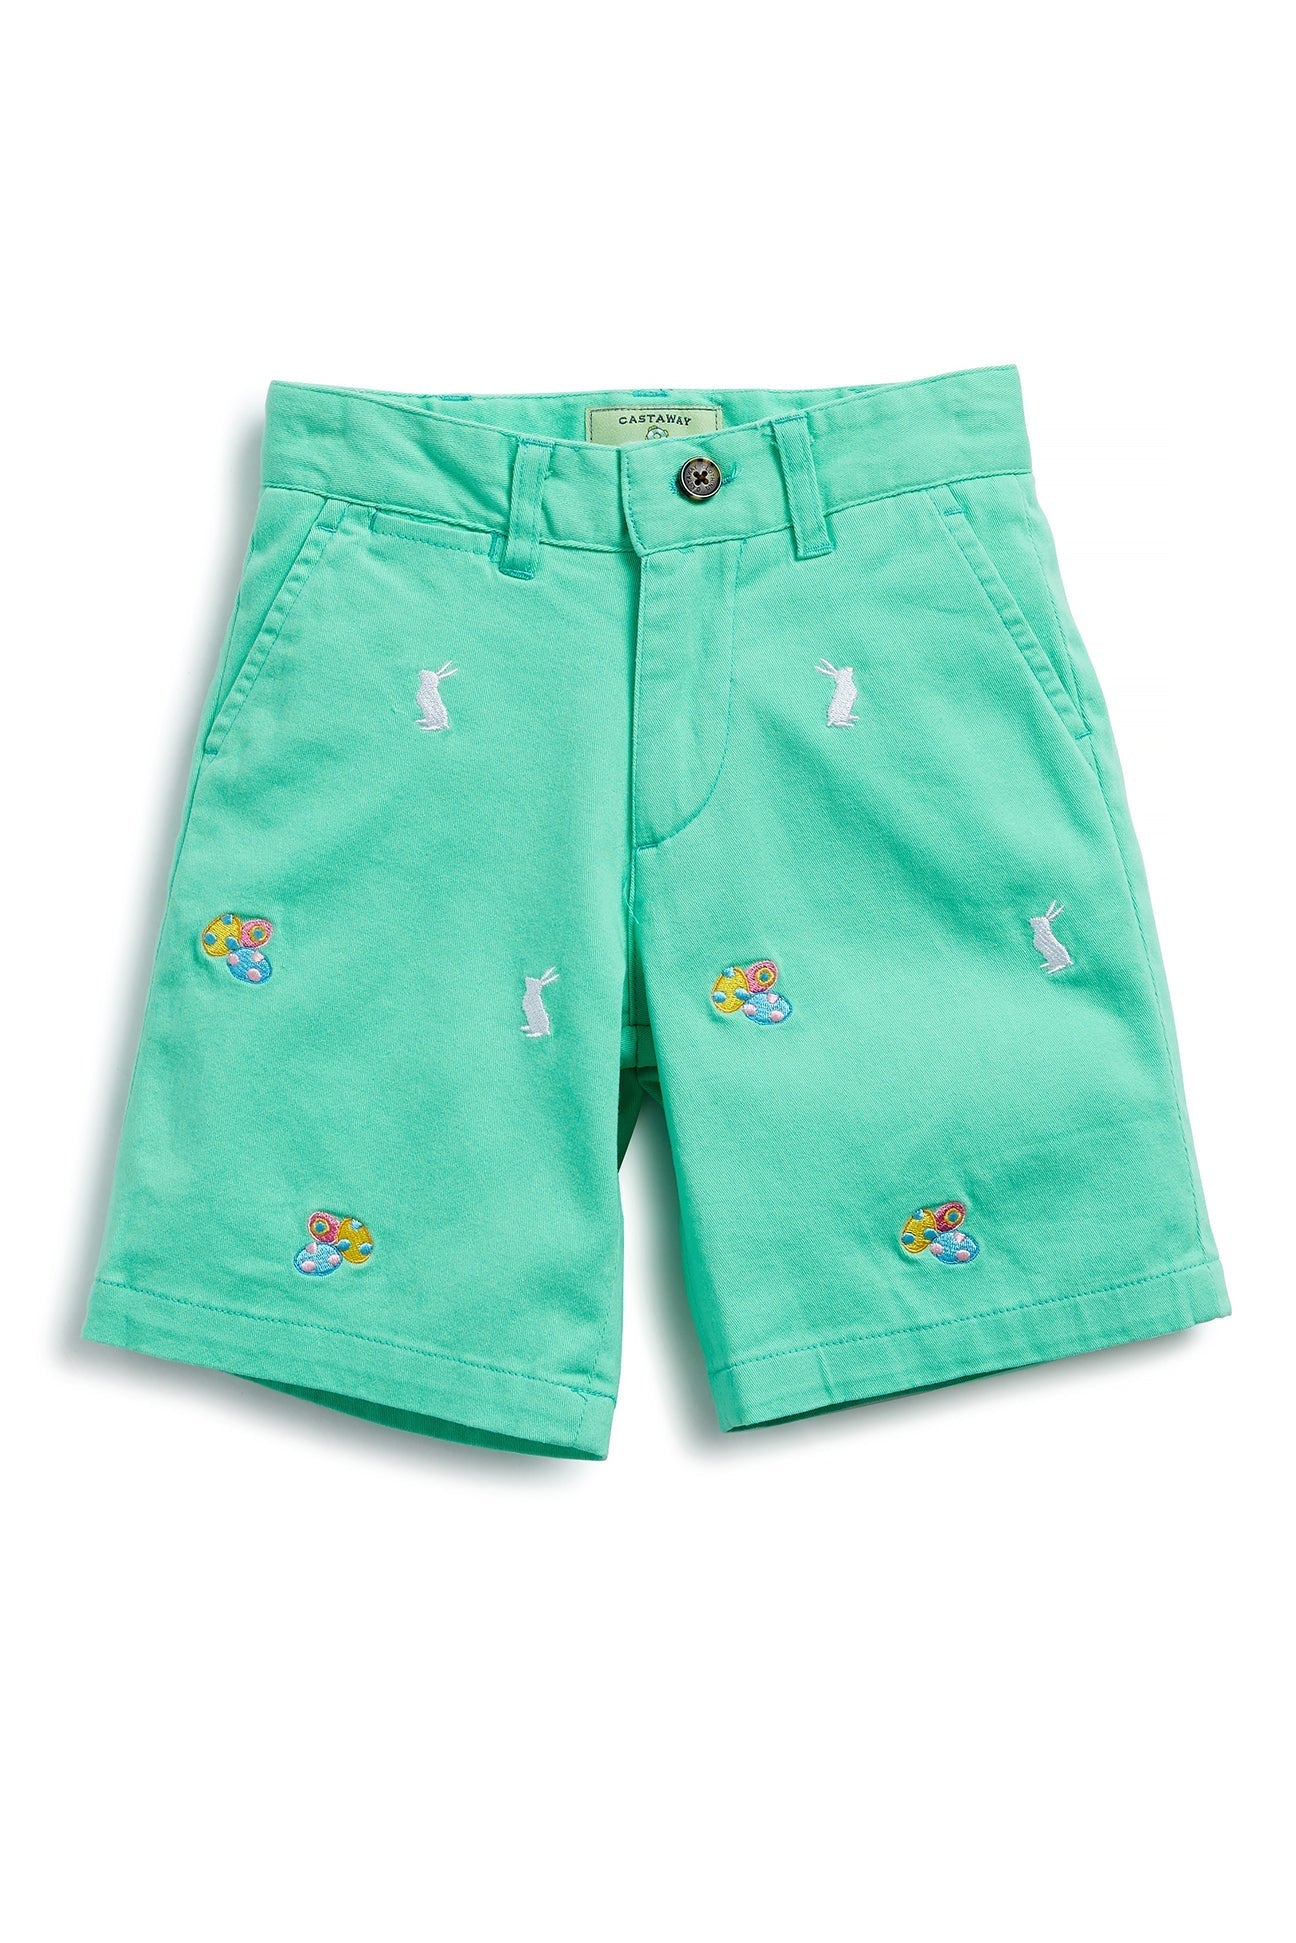 Jetties Short Stretch Twill Spring Green with Easter Eggs & Bunny BOYS SHORTS Castaway Nantucket Island